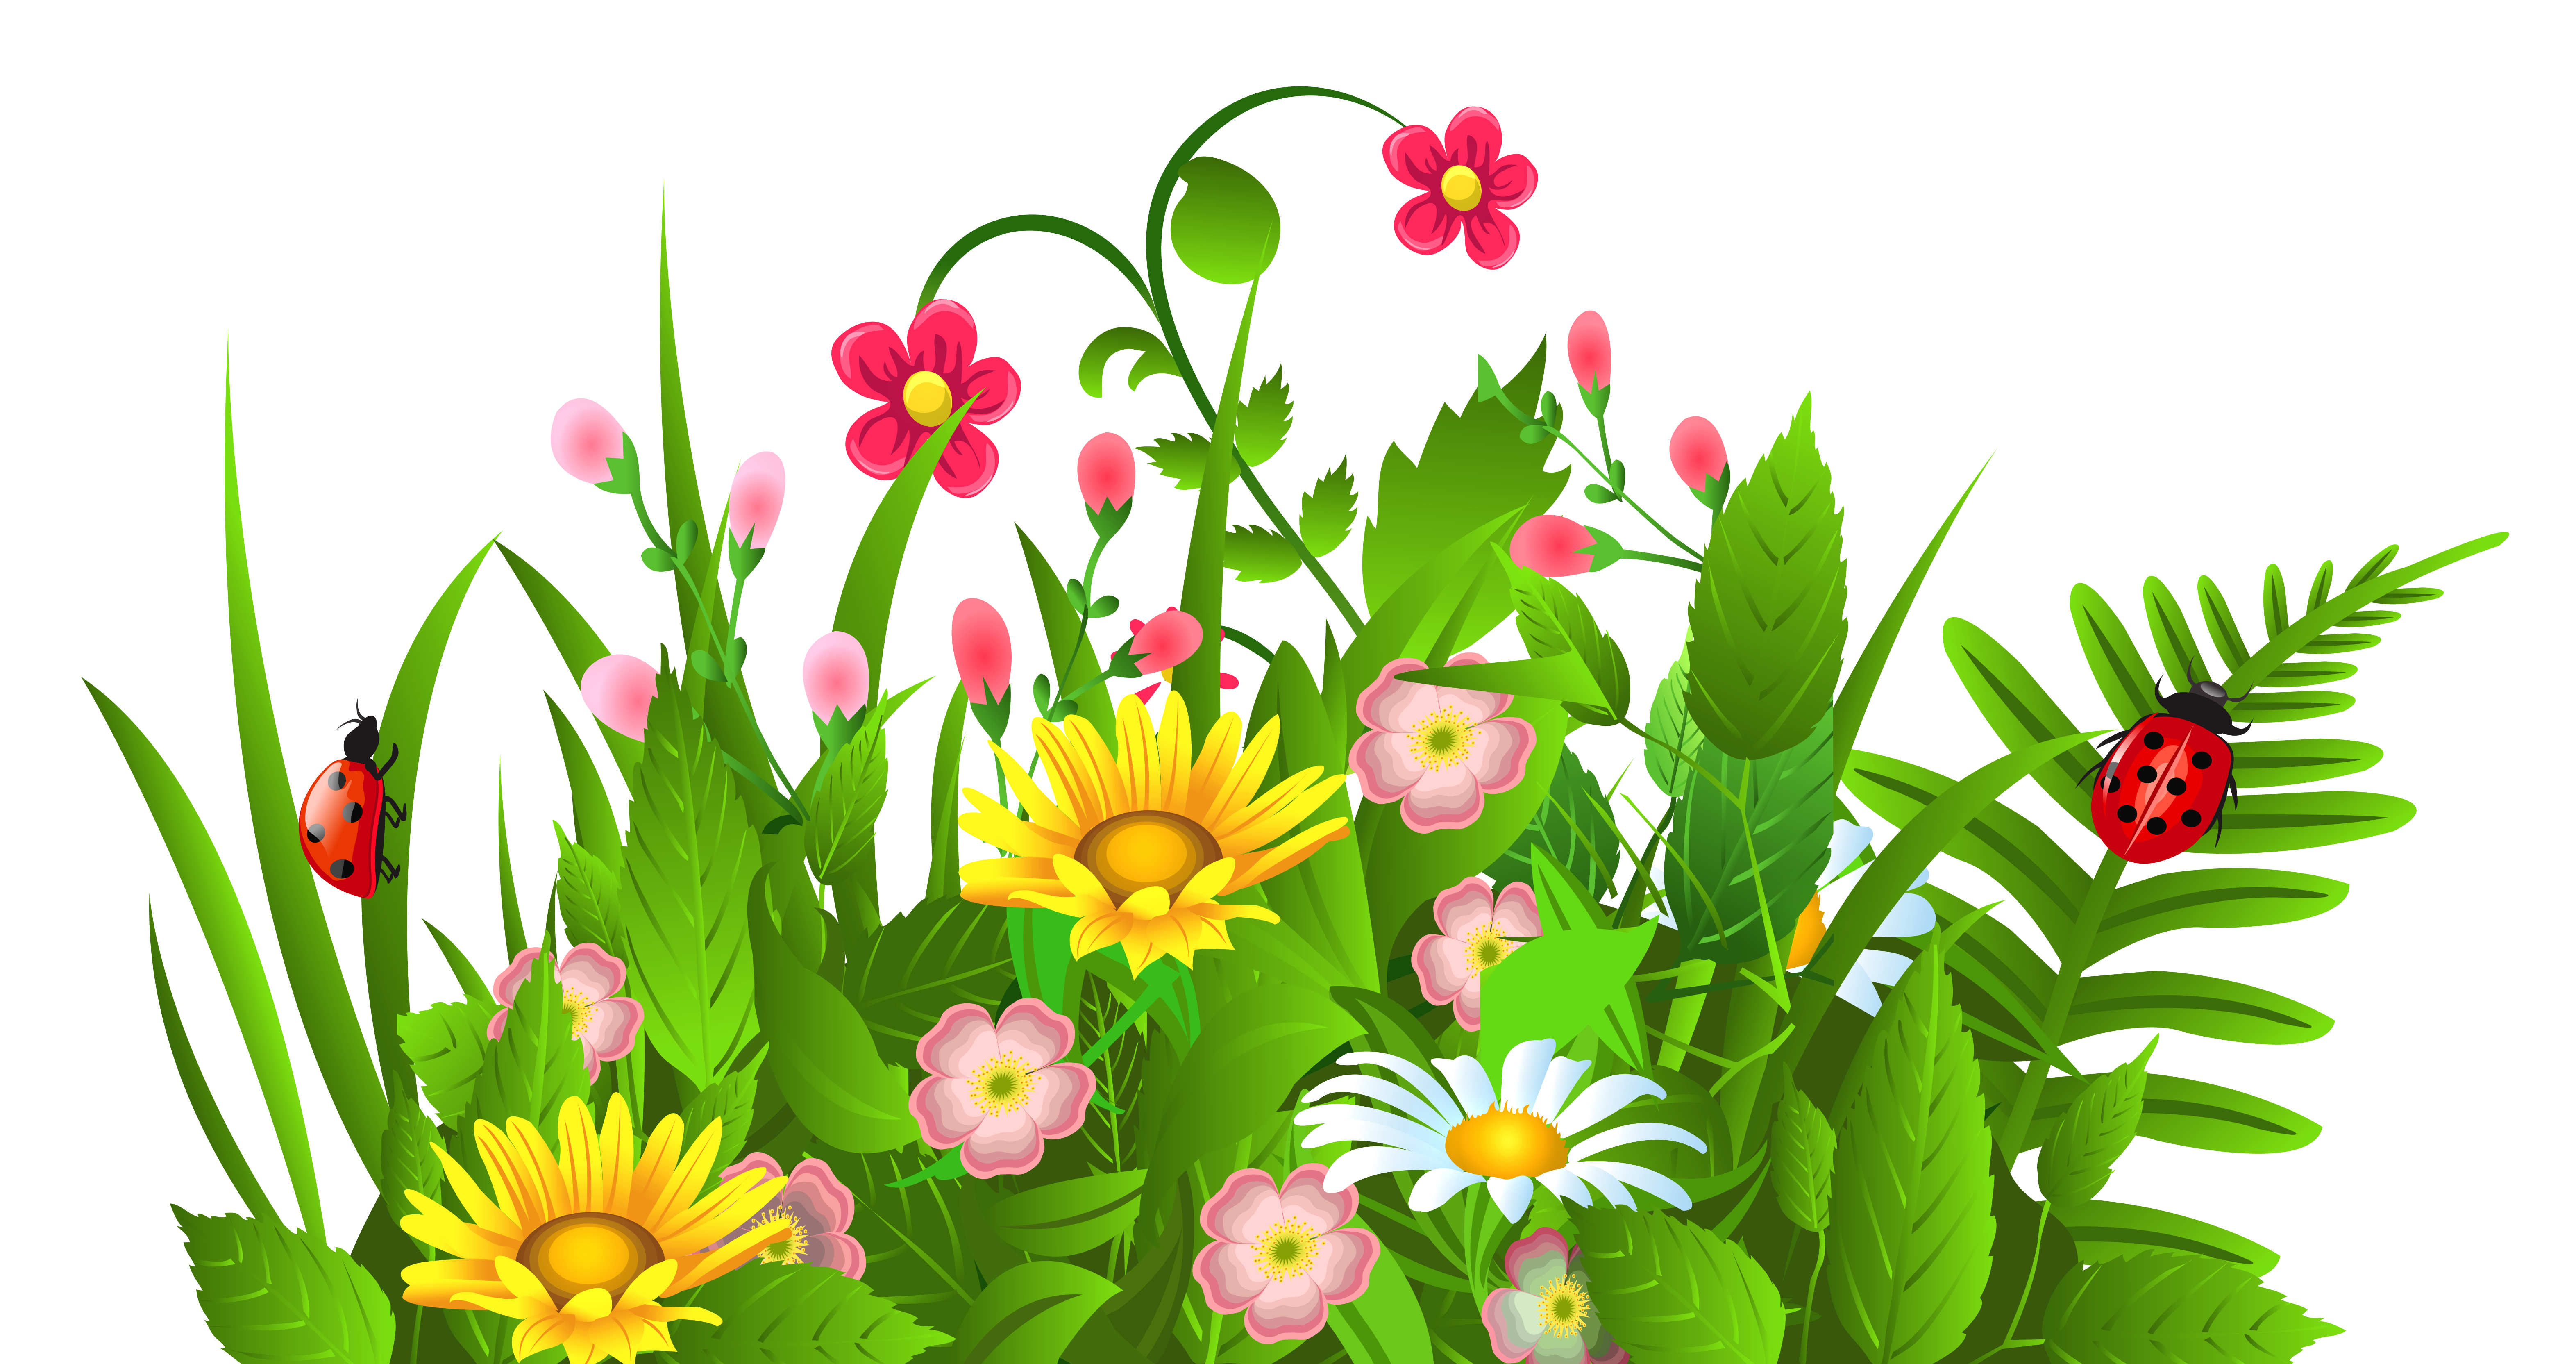 Cute Grass and Flowers PNG Clipart. Flower coloring pages, Flower phone wallpaper, Flower art